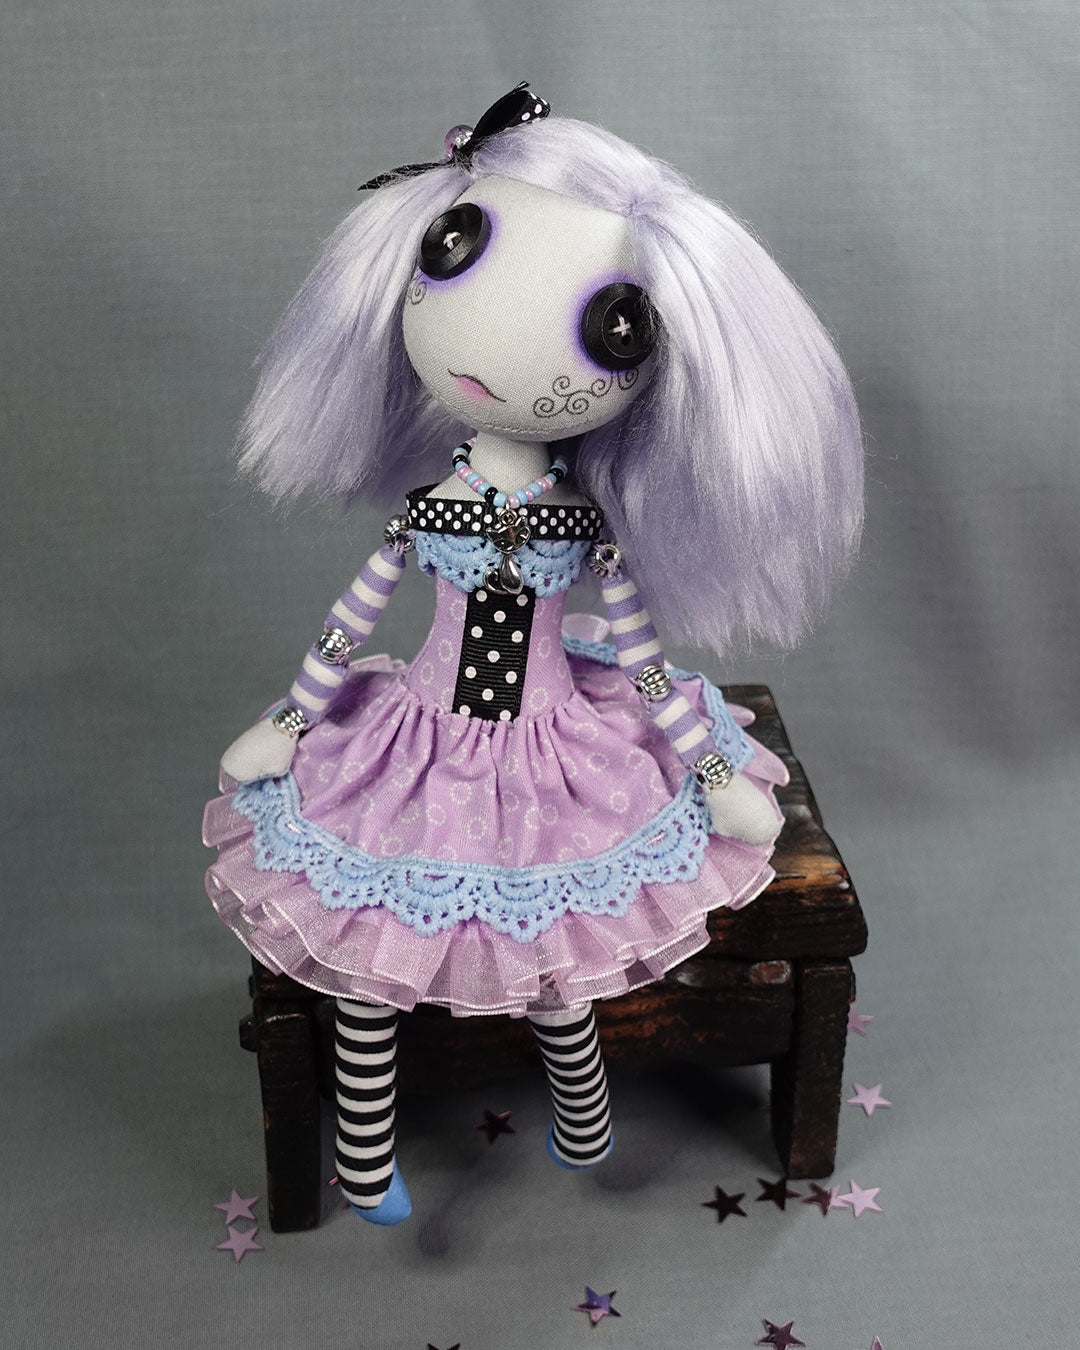 a cloth art doll with button eyes dressed in pastels with black and white polka dot trim